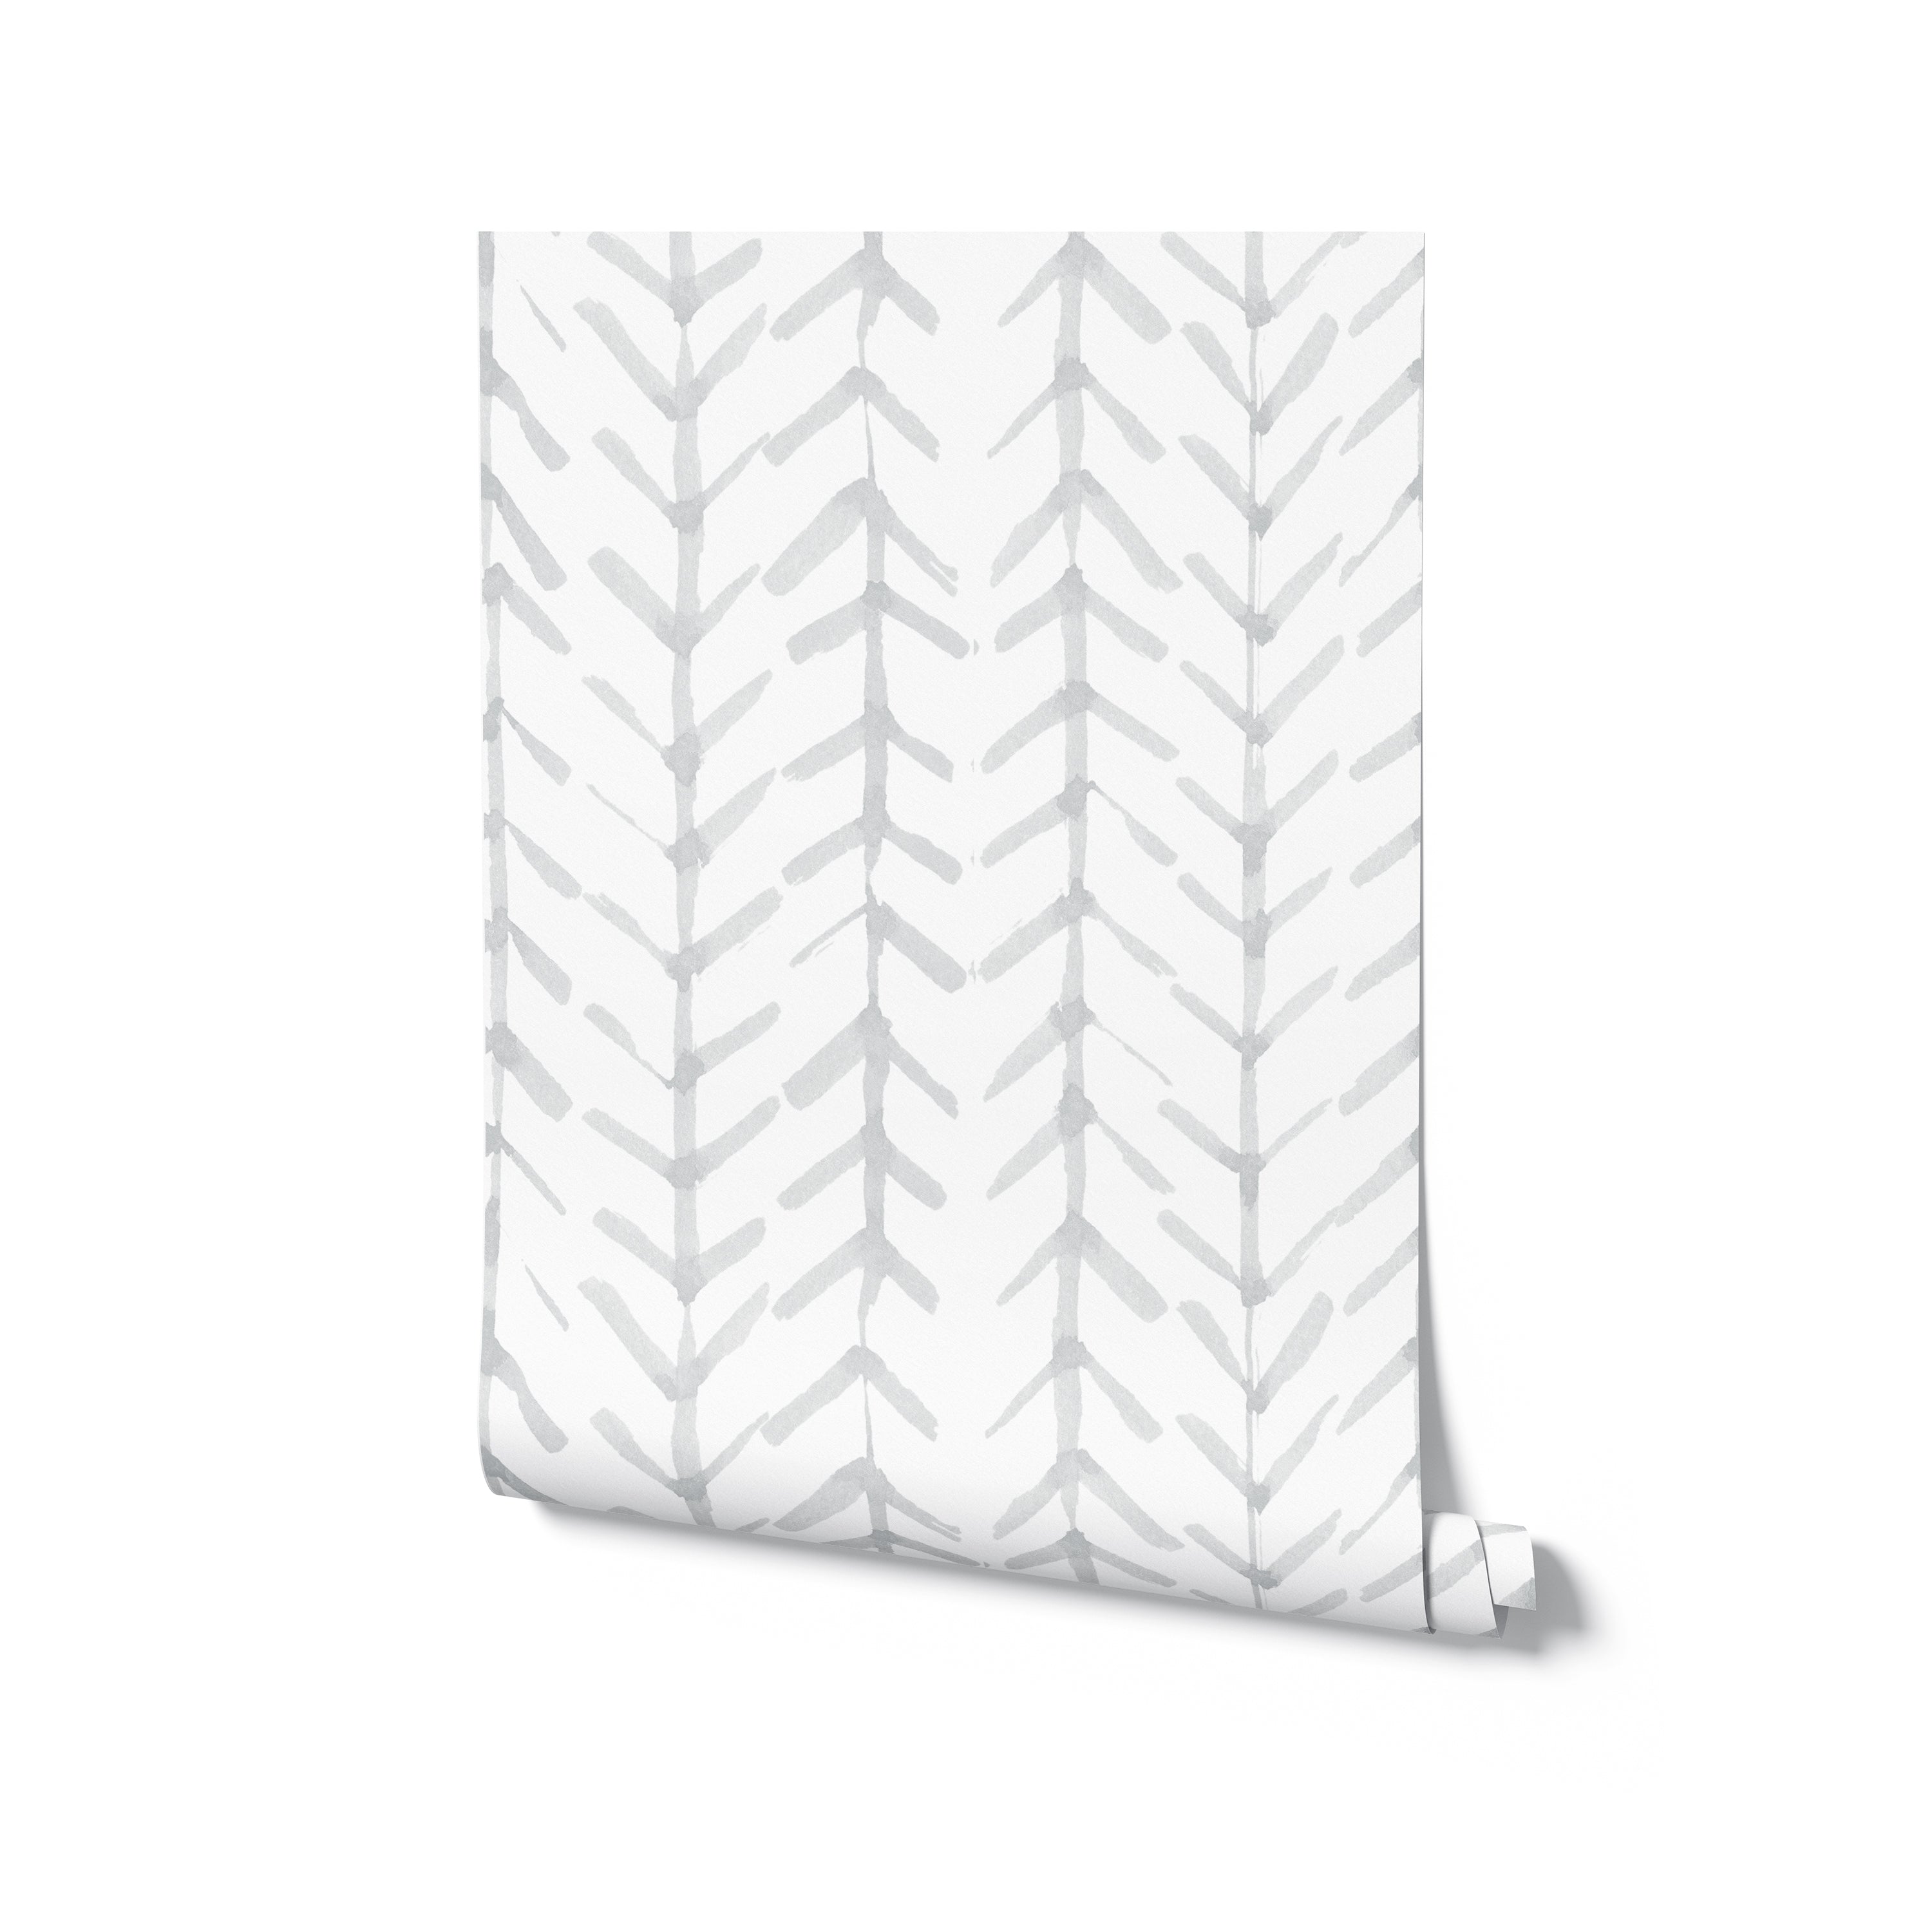 A roll of Hand Painted Chevron Arrow Wallpaper with the soft gray arrow pattern visible, symbolizing a handmade and bespoke touch for interior decor, ready to unroll and transform a space with its subtle, artistic vibe